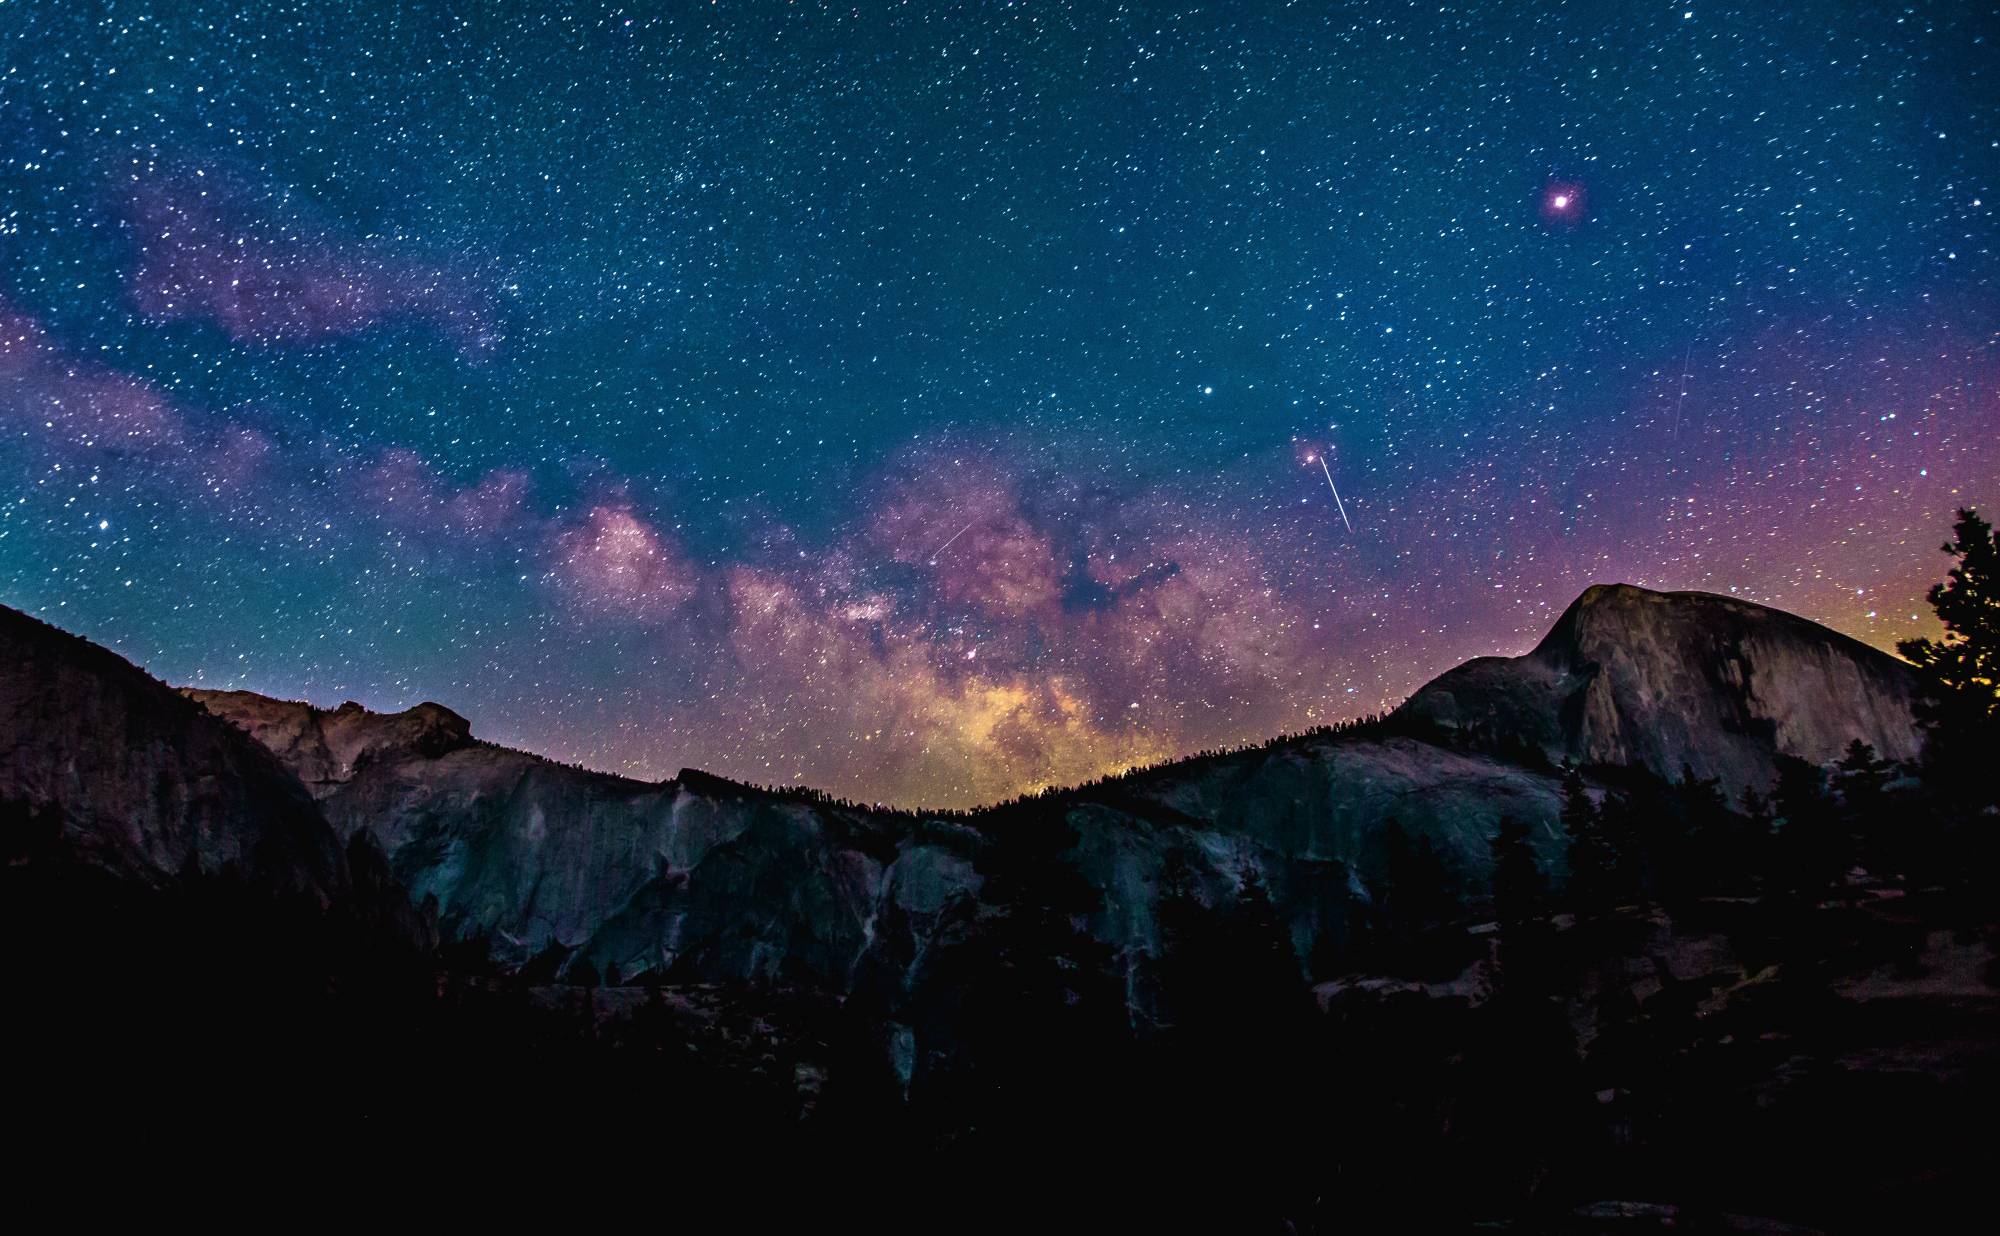 Starry night set behind mountain scape